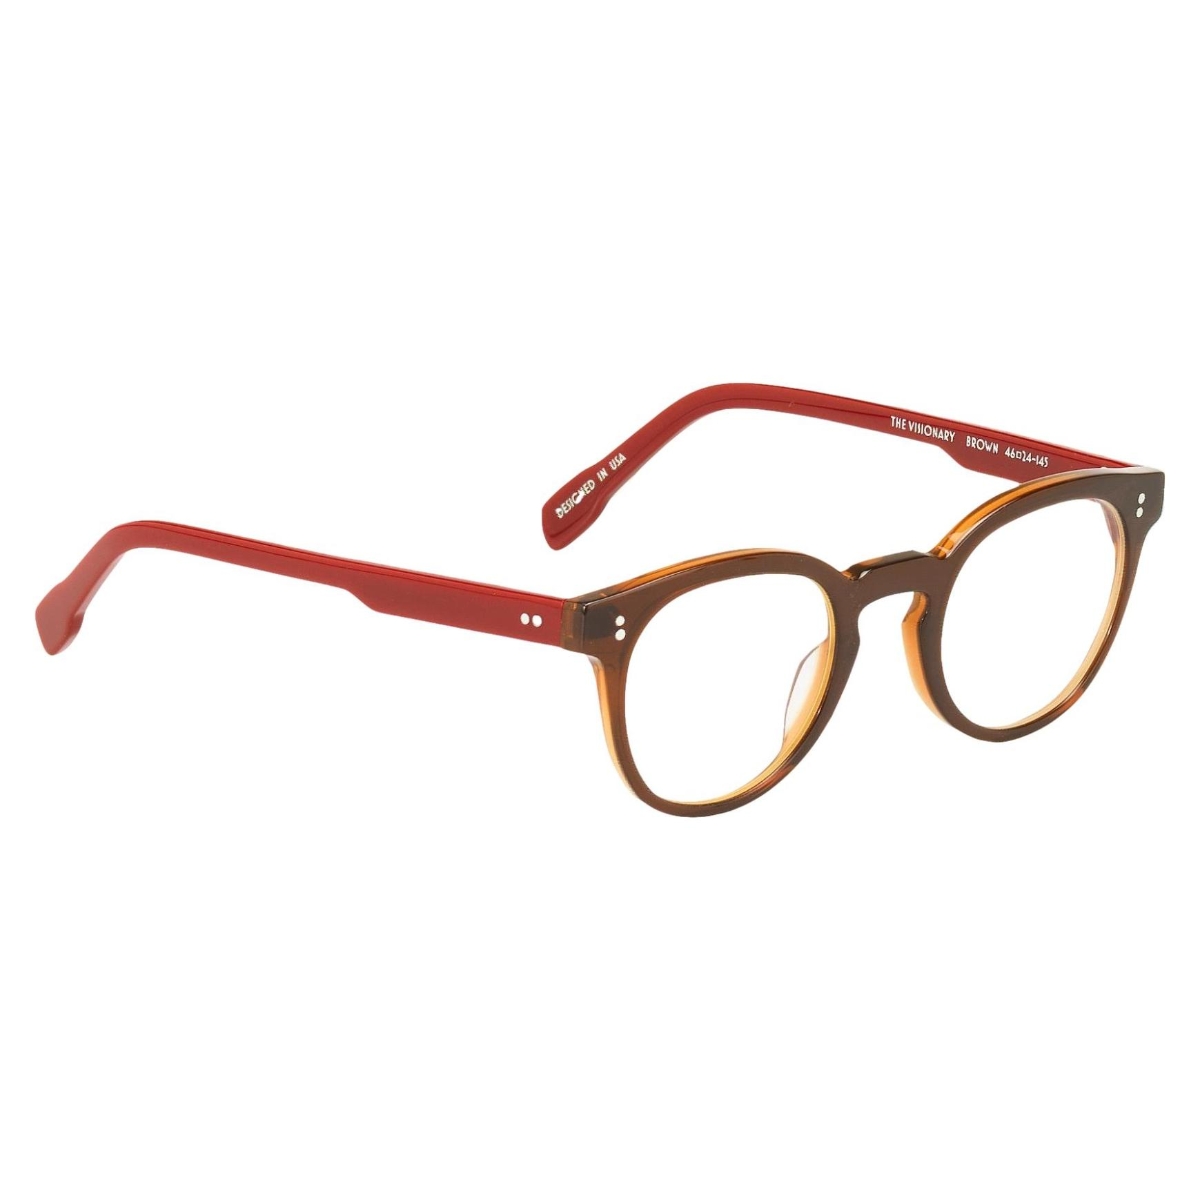 Sugar Specs - The Visionary 02 Brown